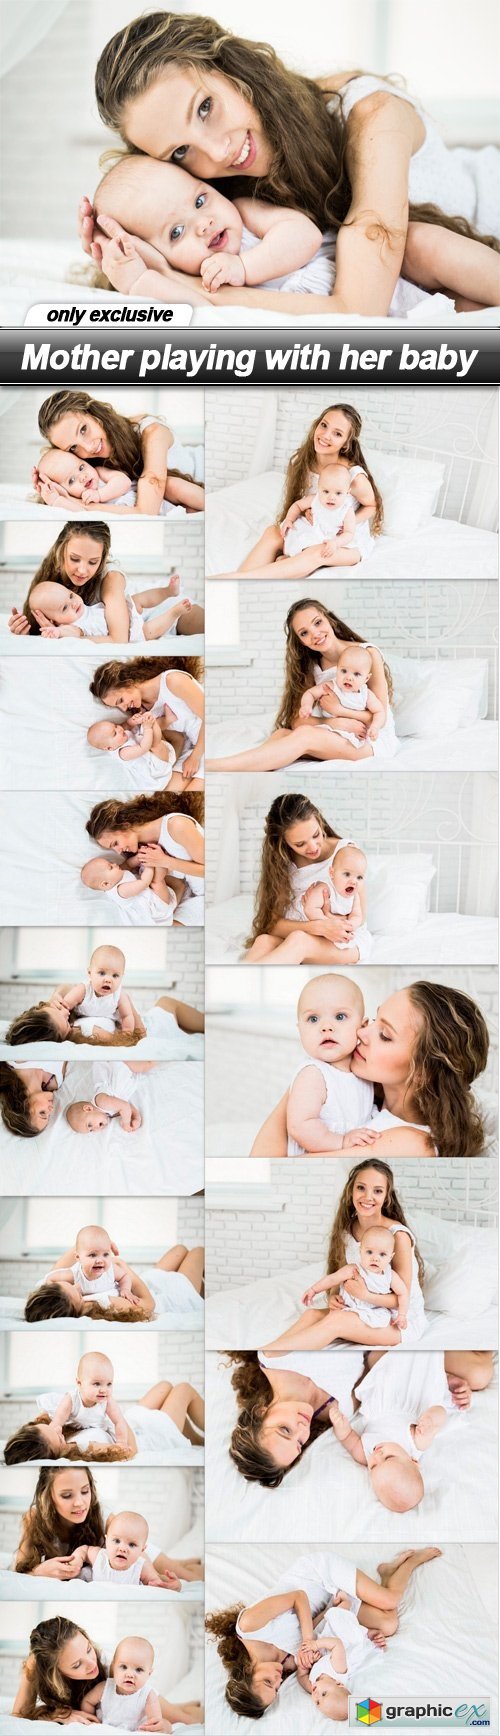 Mother playing with her baby - 17 UHQ JPEG